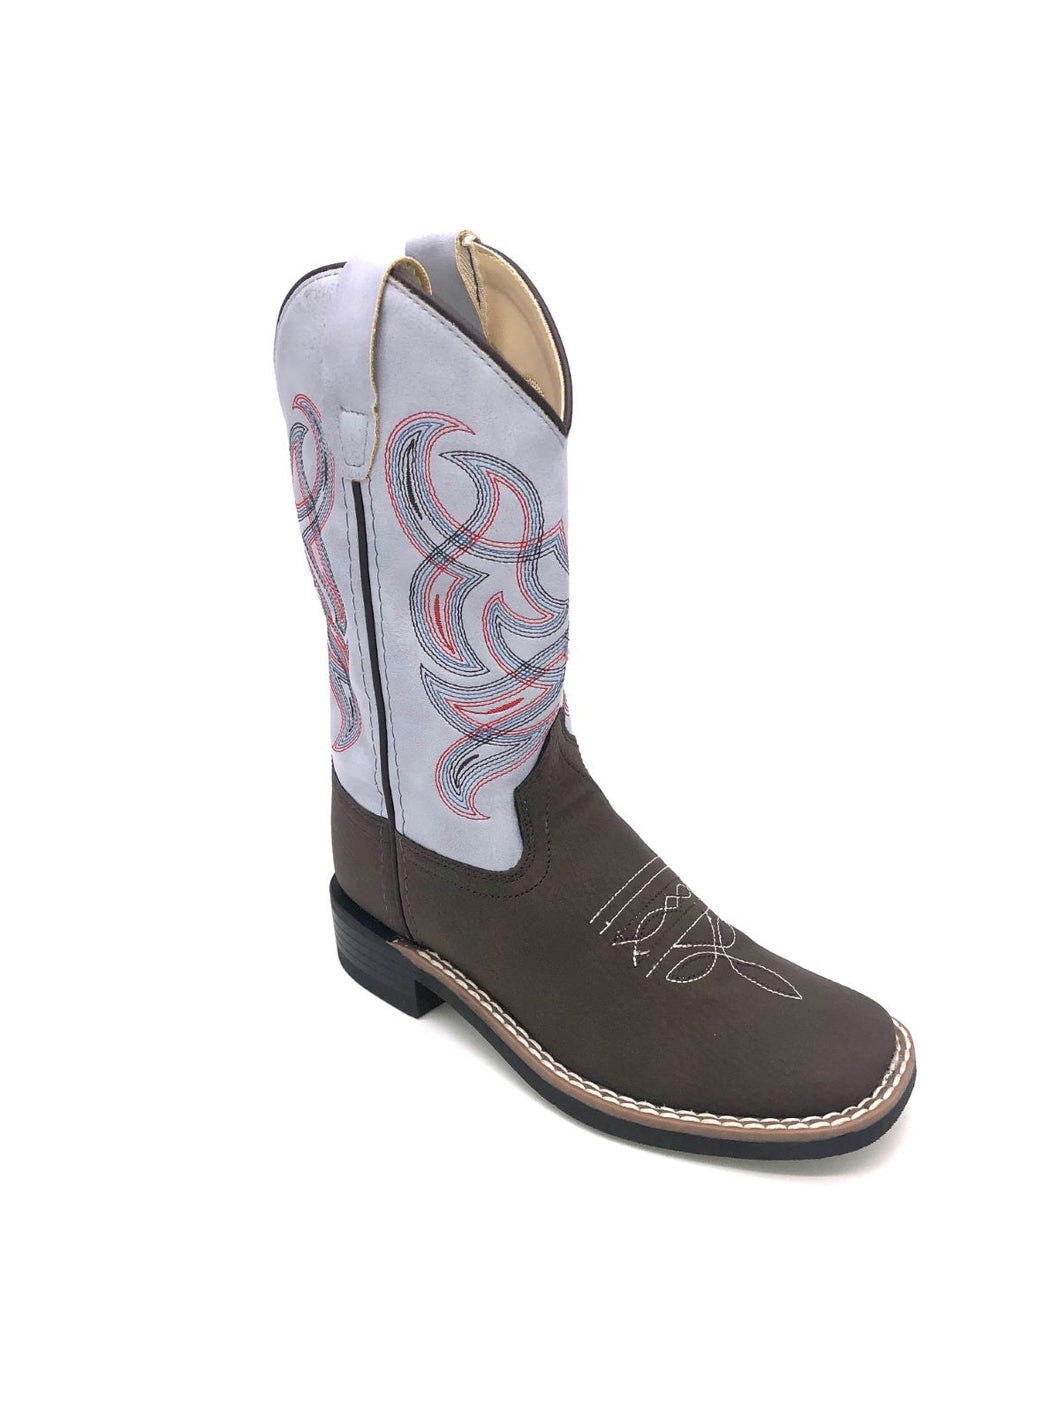 'Old West' Children's Western Broad Square Toe - Brown / Sky Blue